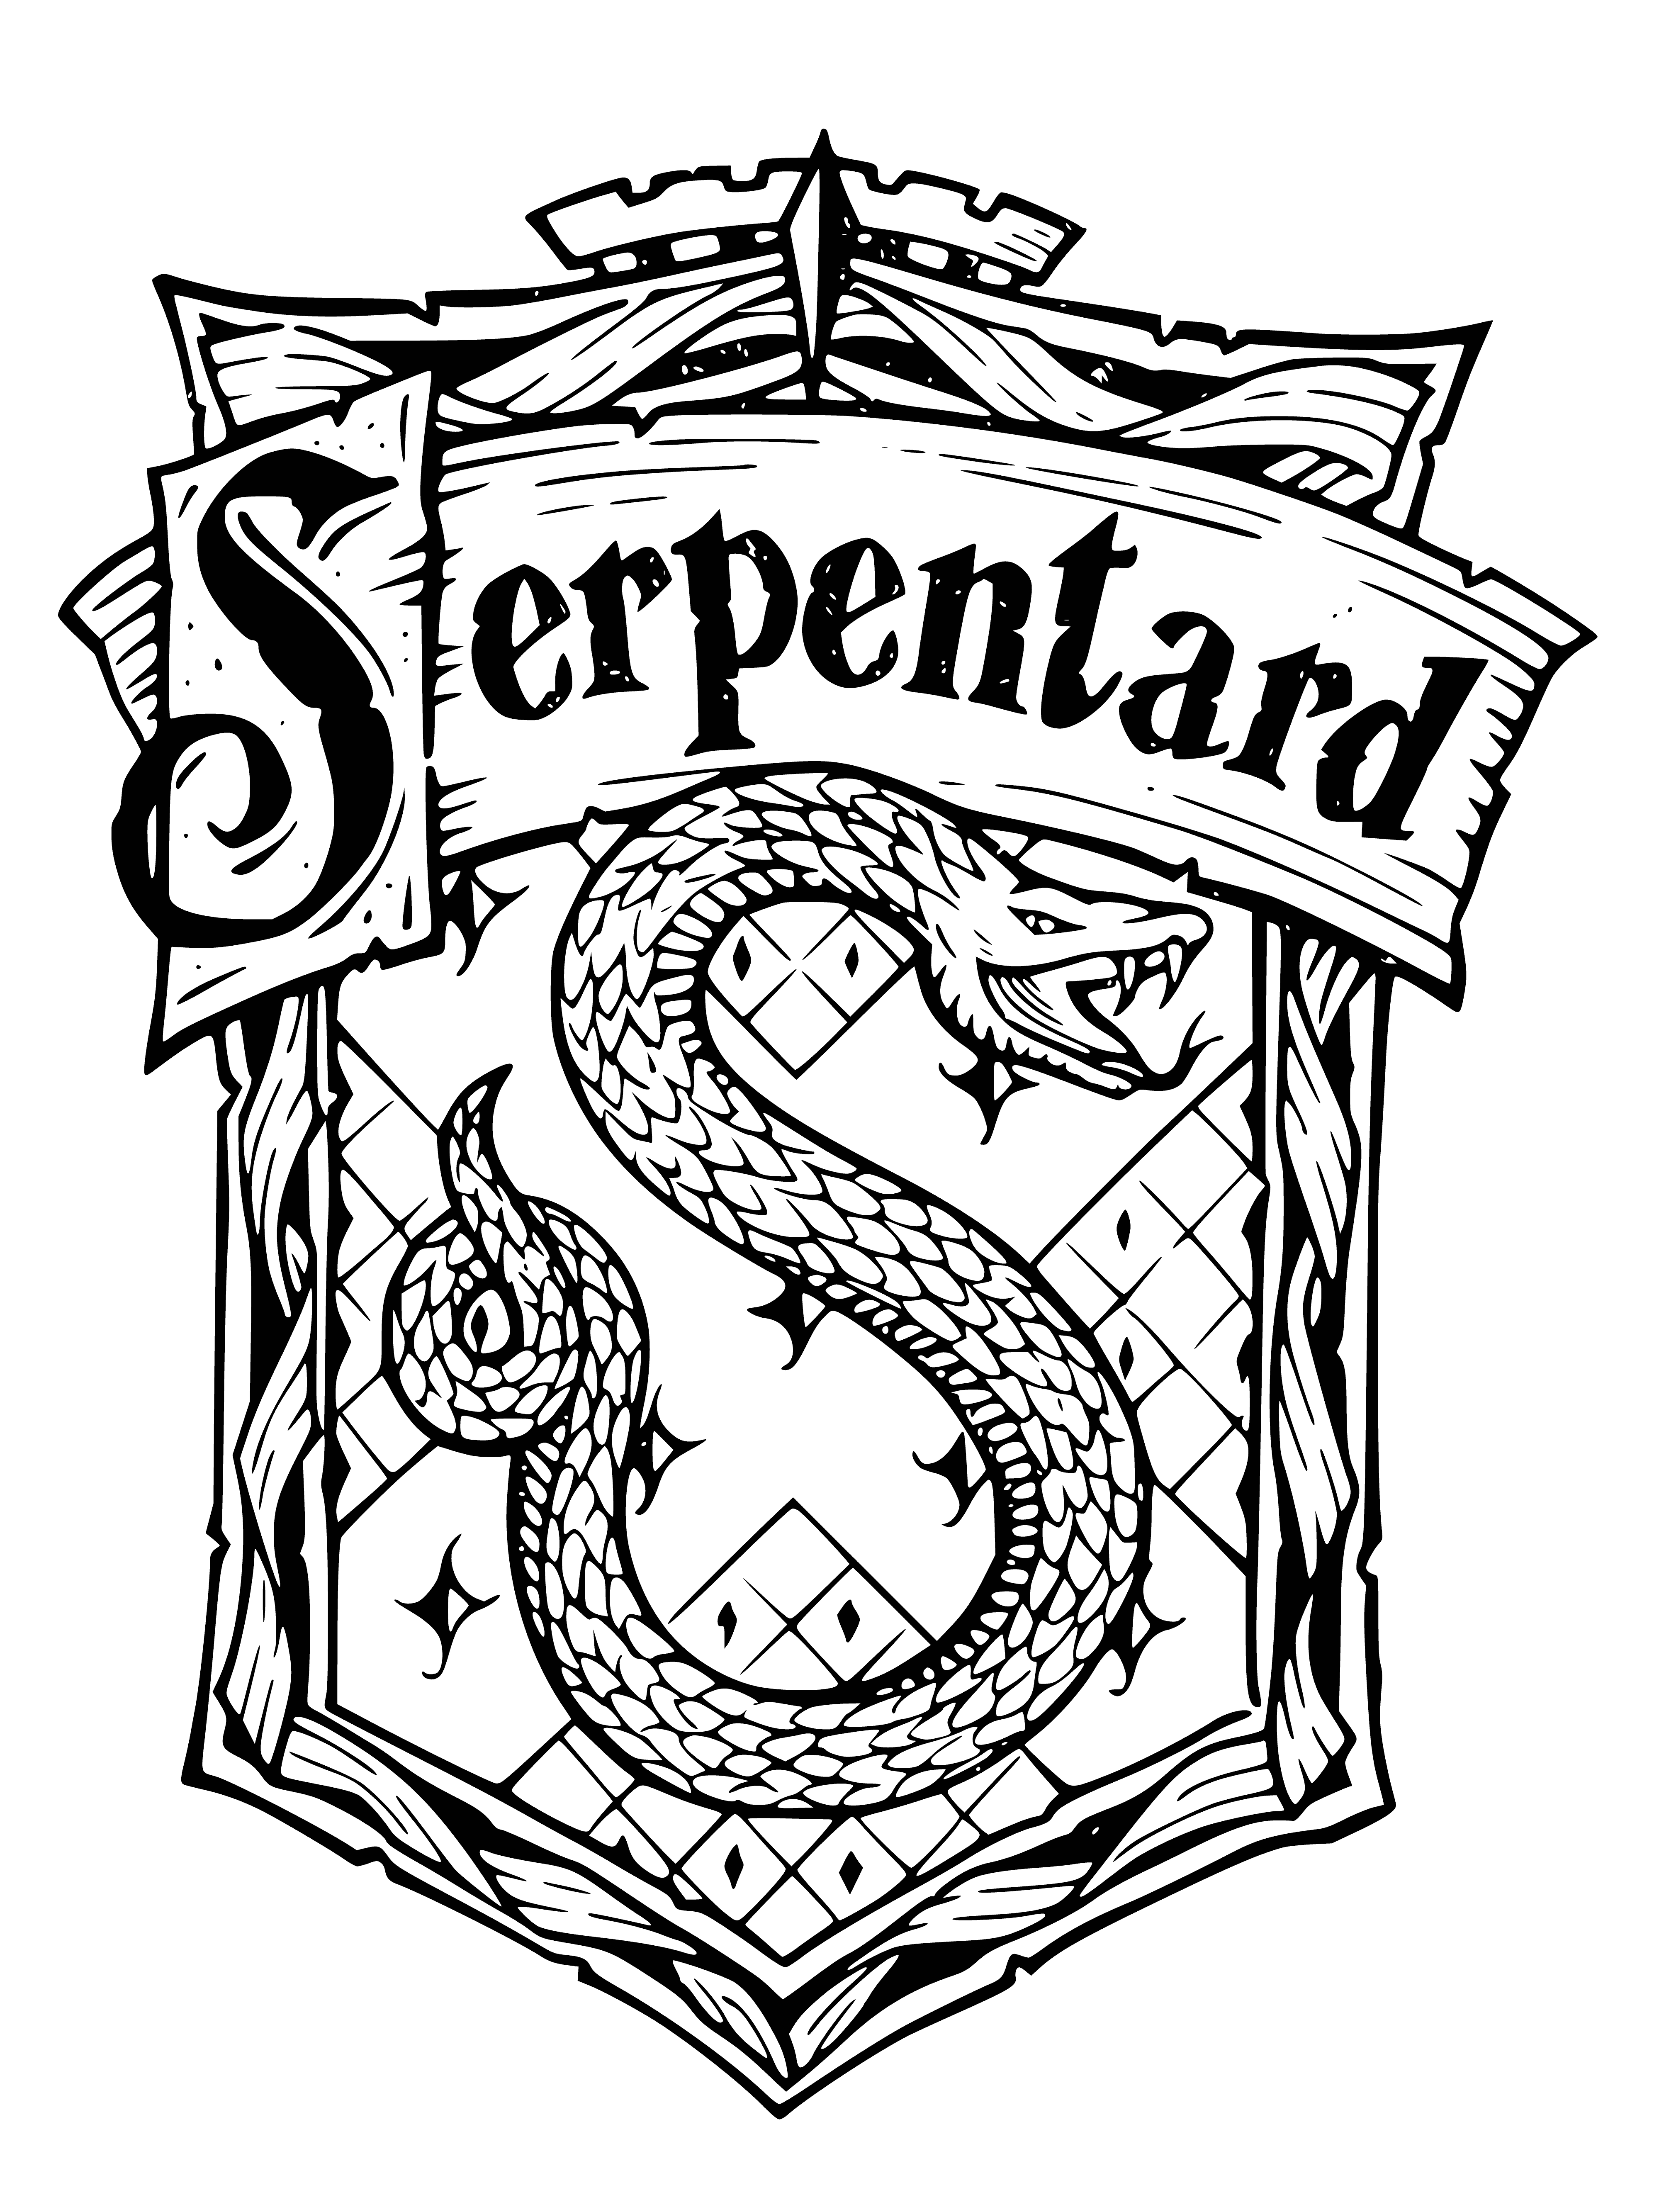 coloring page: Slytherin coat of arms is green/silver, divided into 4 quadrants, snake in center of shield, motto: "Slytherin Will Prevail".